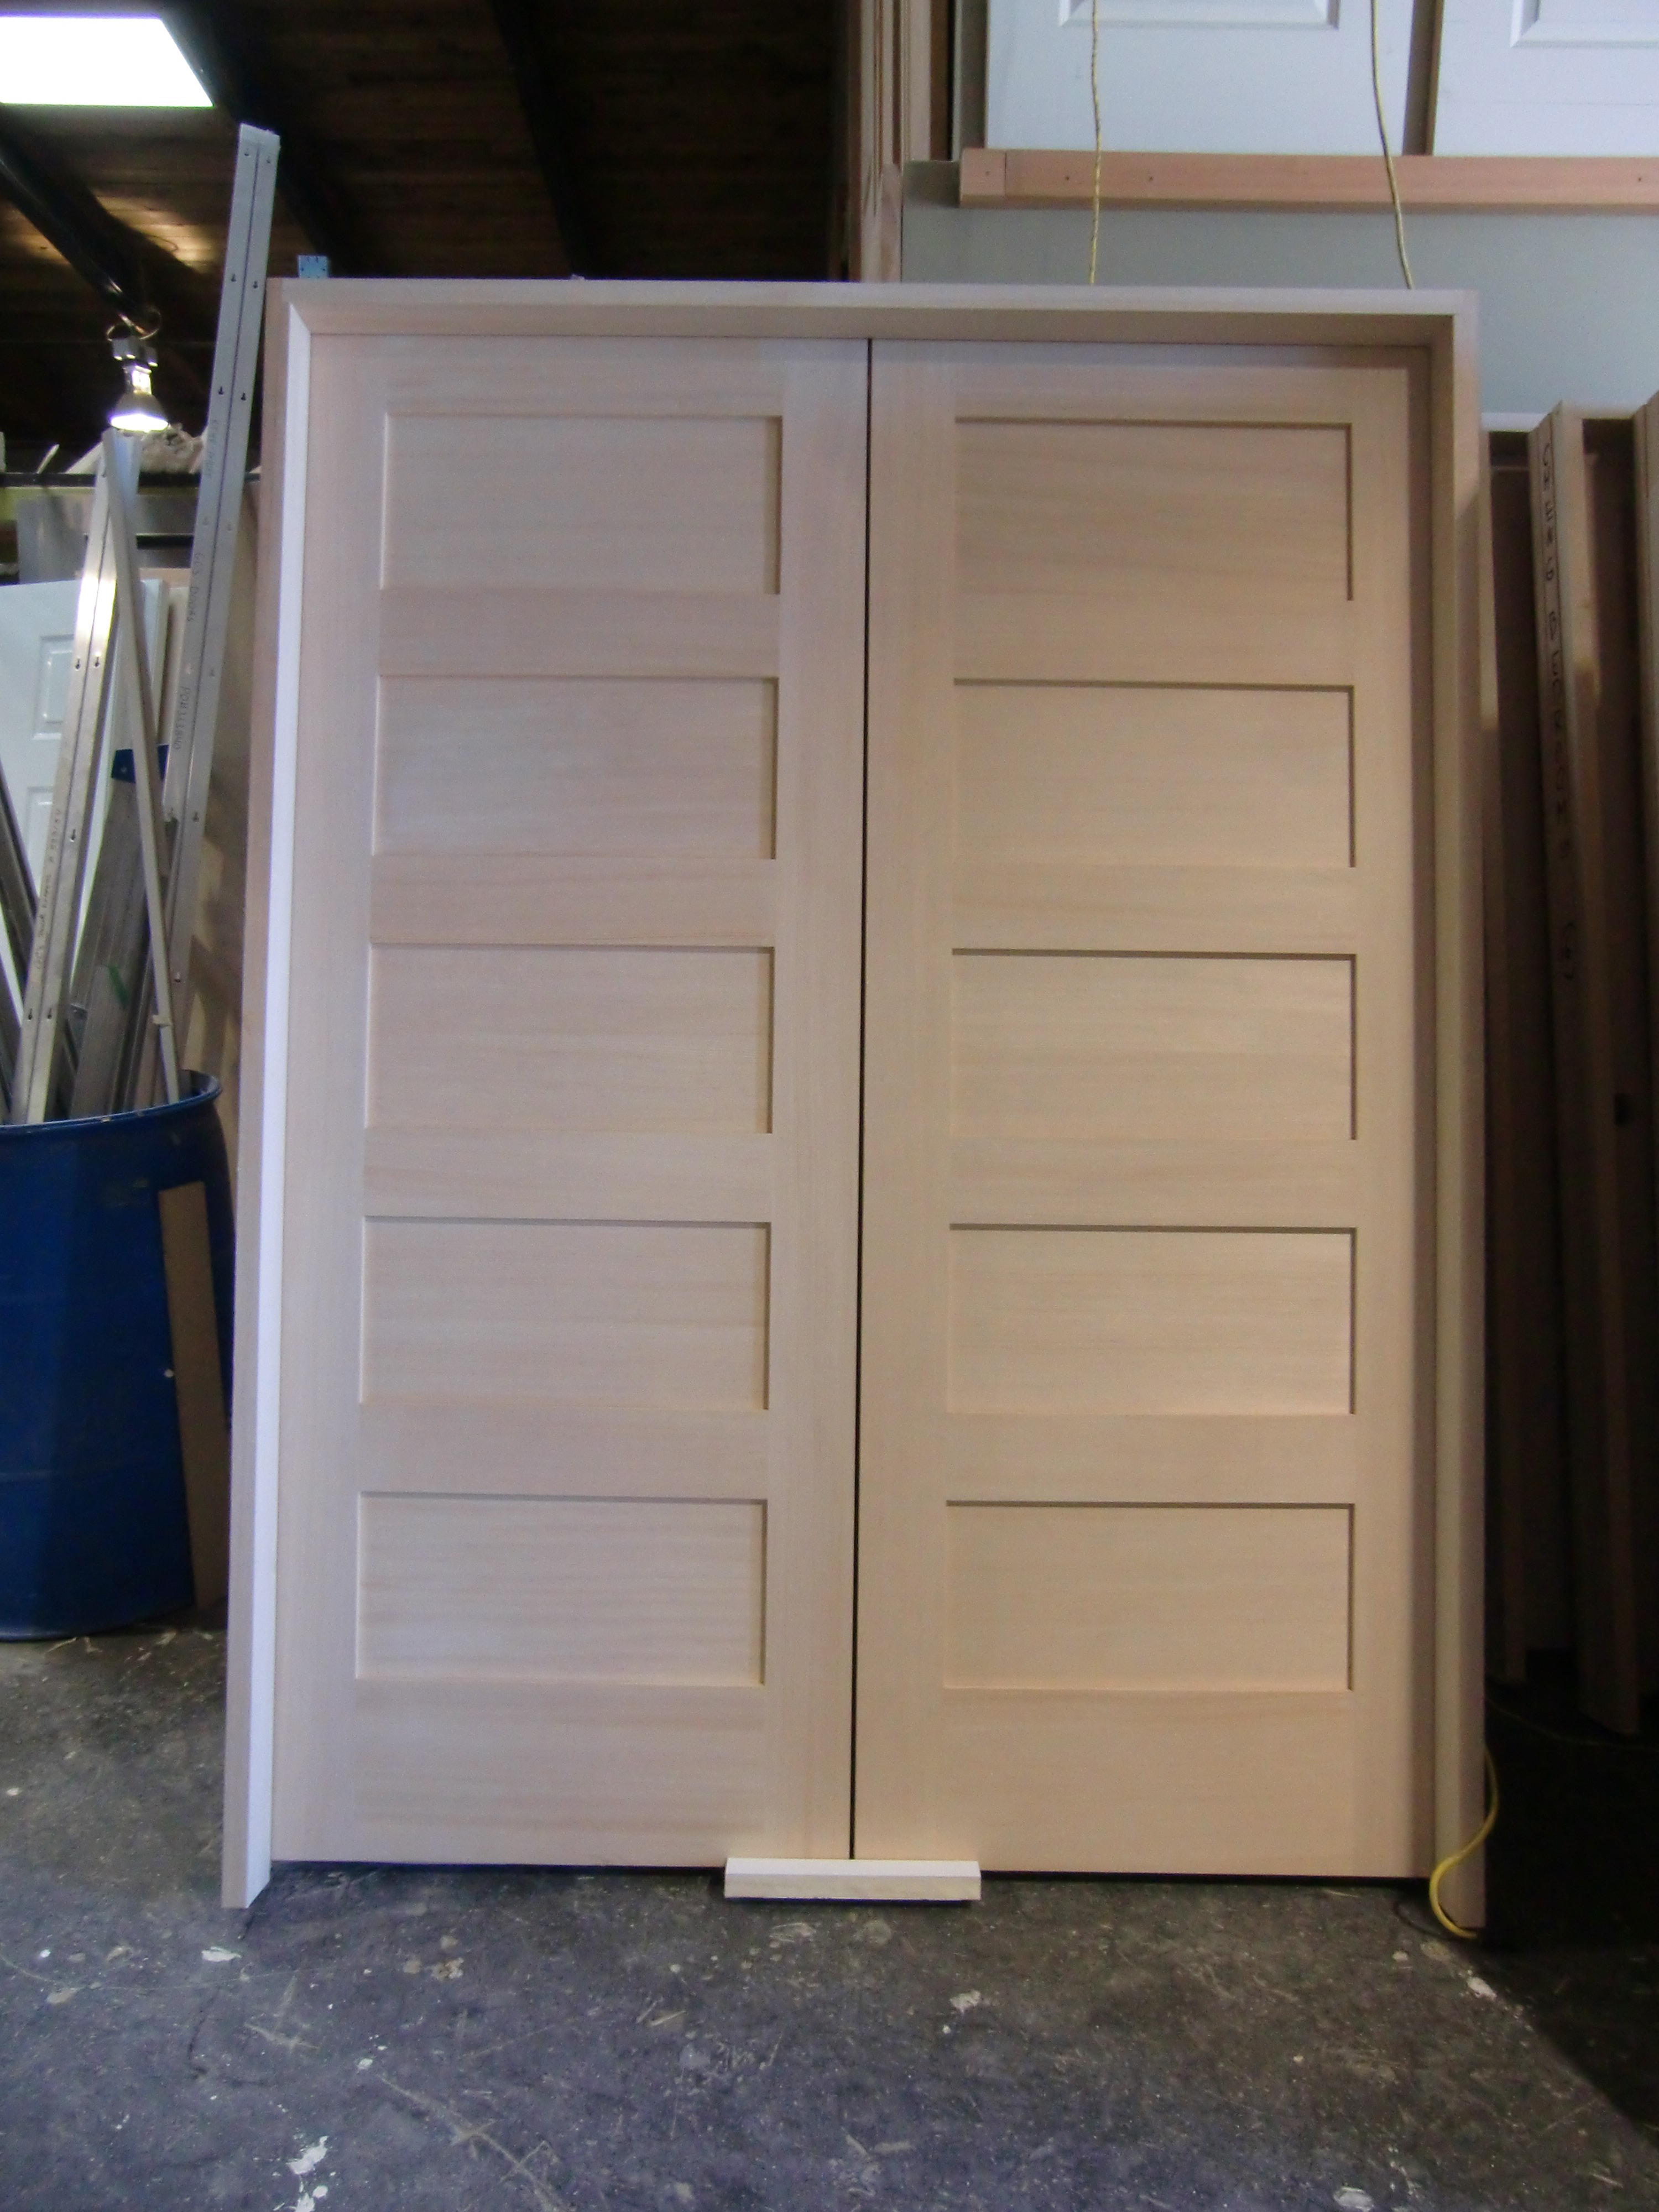 Factory Direct Doors | Product Details - Interior 5 Panel Stain Grade ...